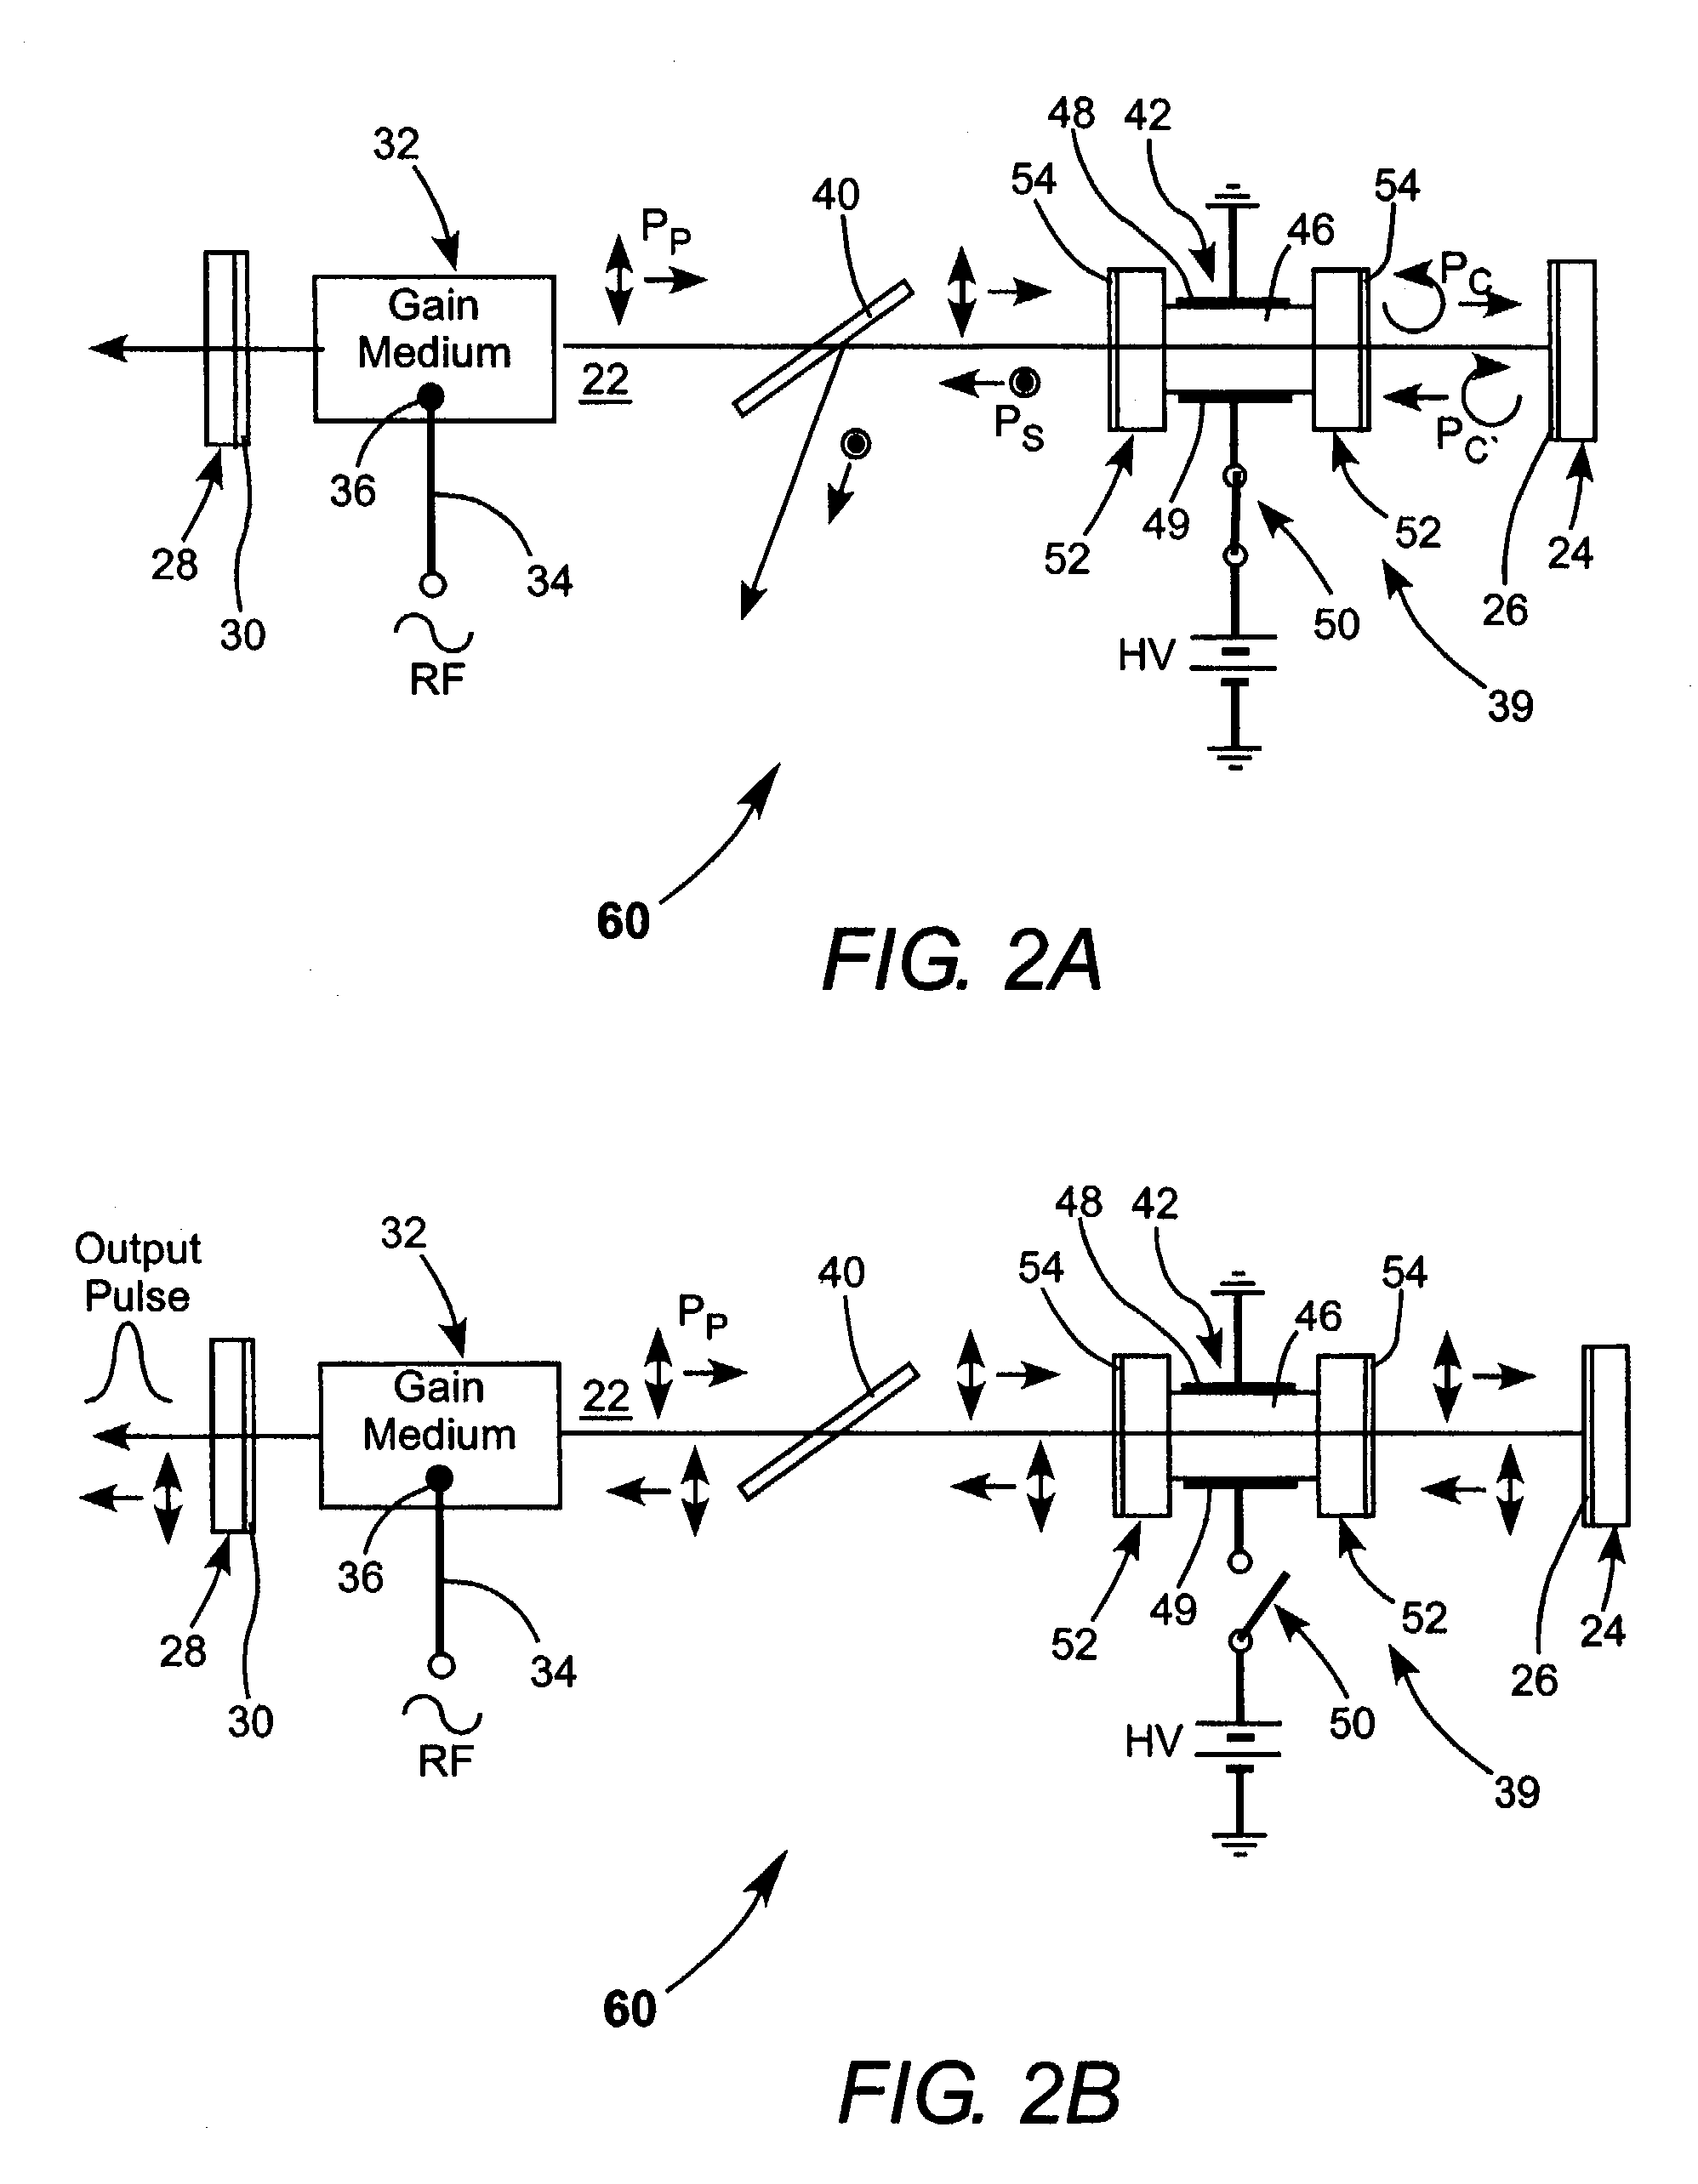 Pulsed CO2 laser including an optical damage resistant electro-optical switching arrangement